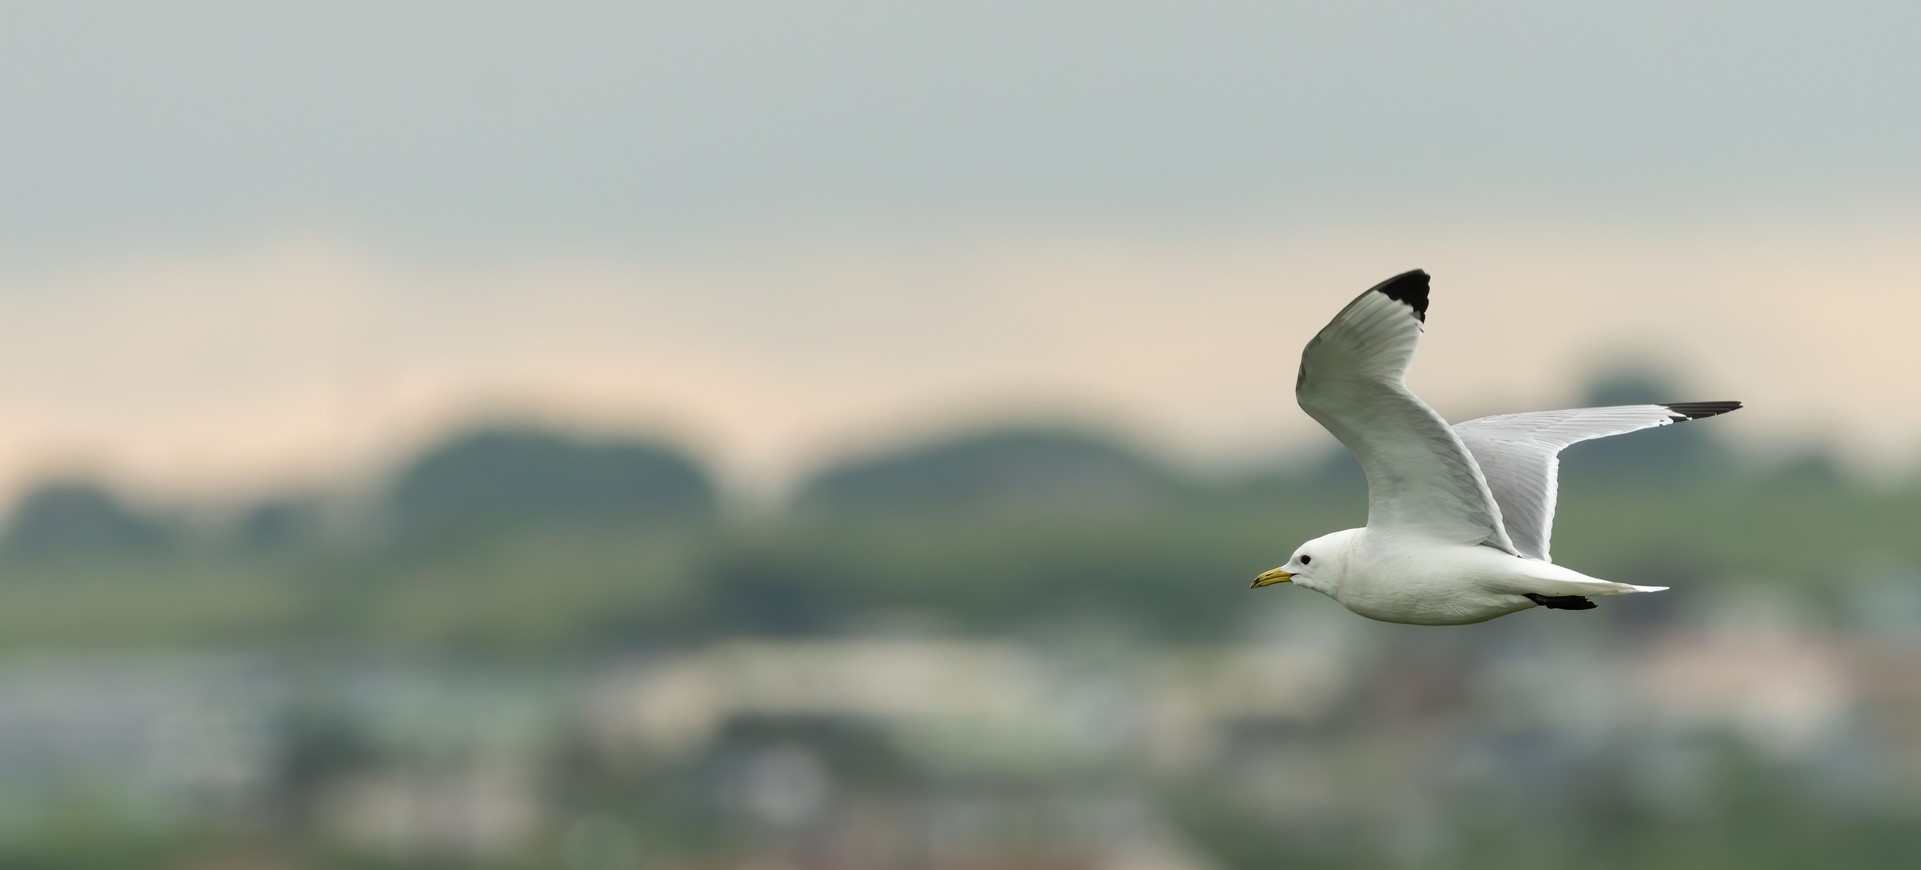 Artic seabird flying with landscape in the background